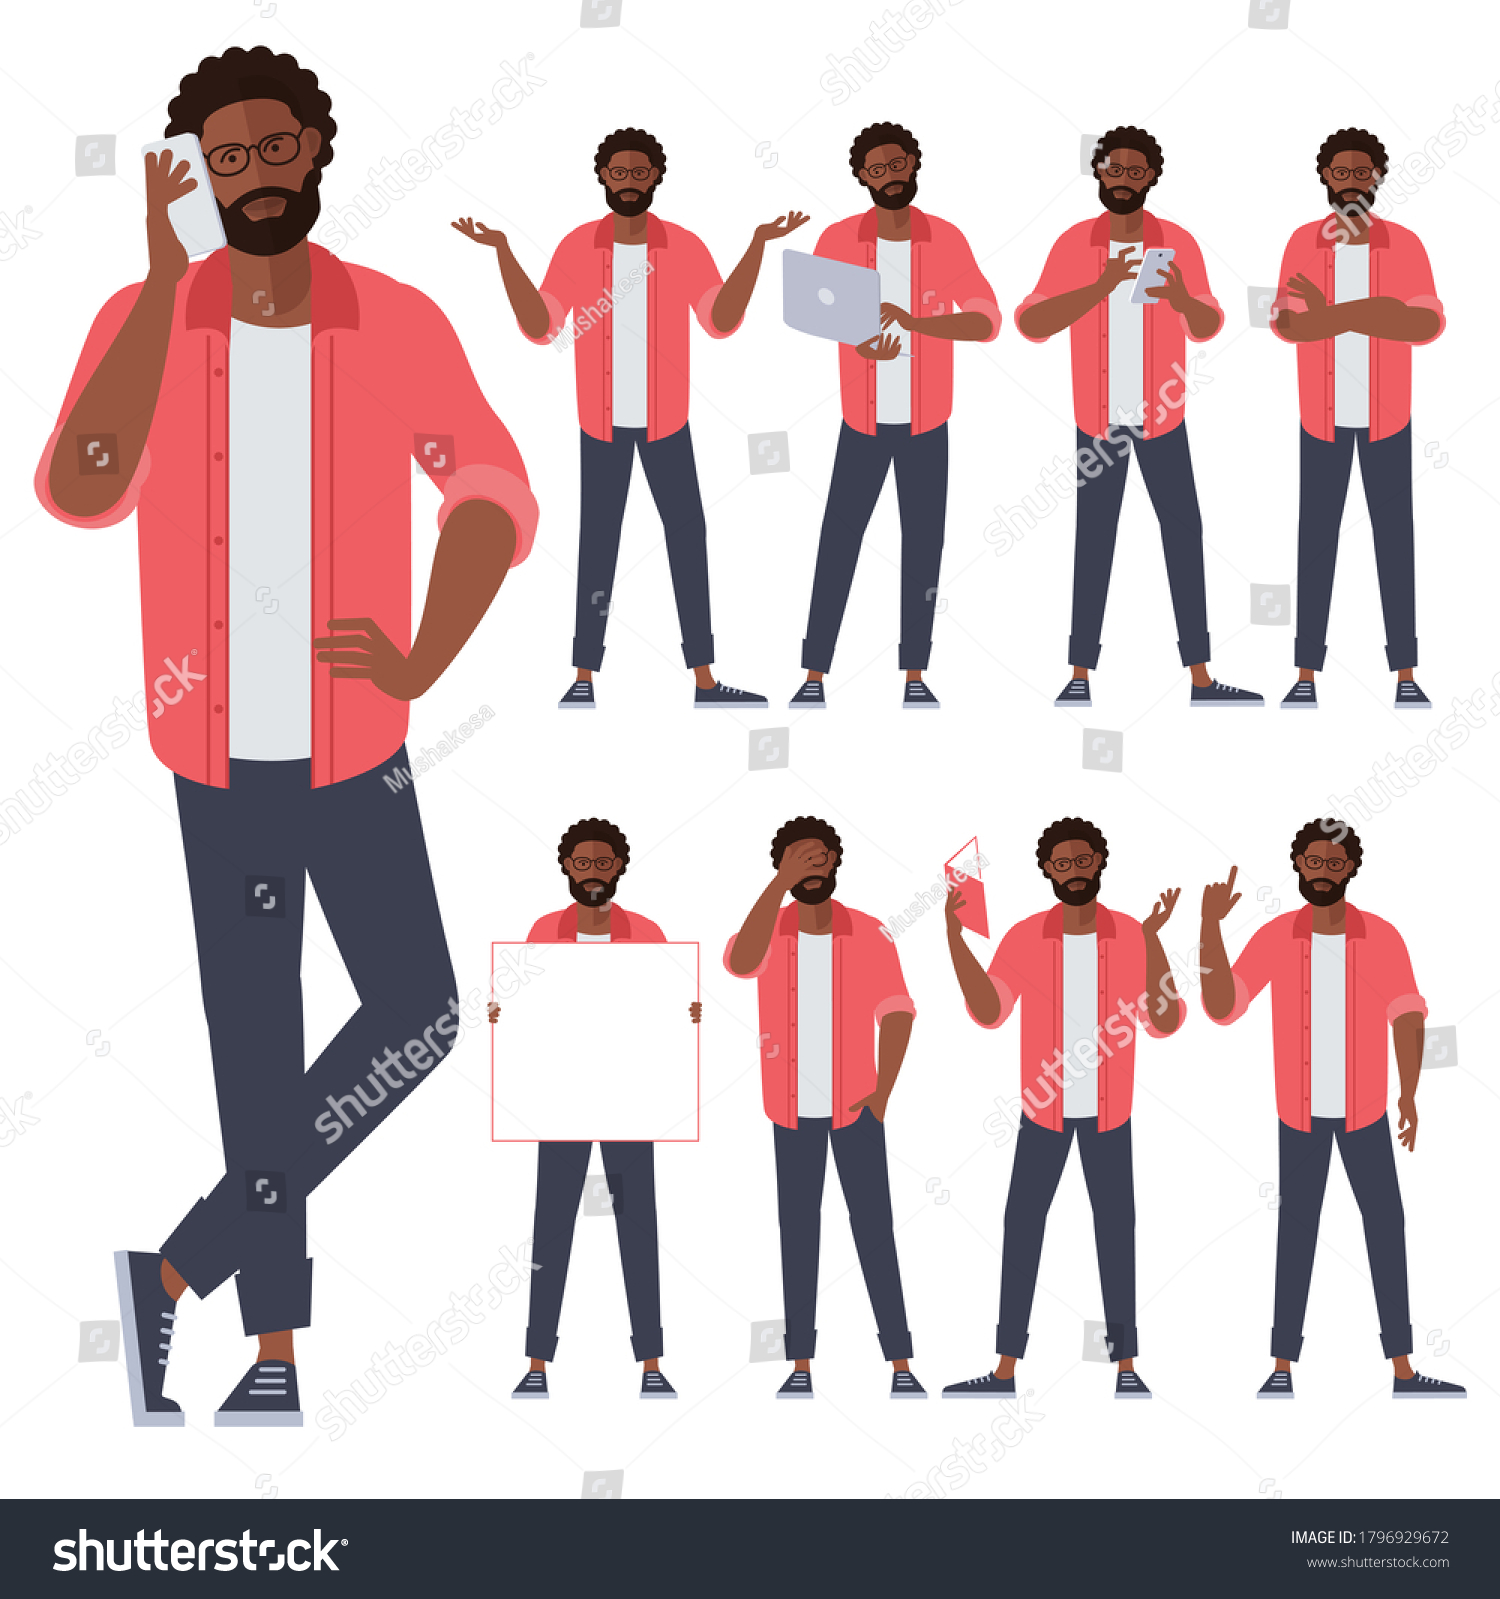 Set of flat design young black afro american man characters, various poses and gestures and everyday activities. Learning, chatting, phonning, working. #1796929672